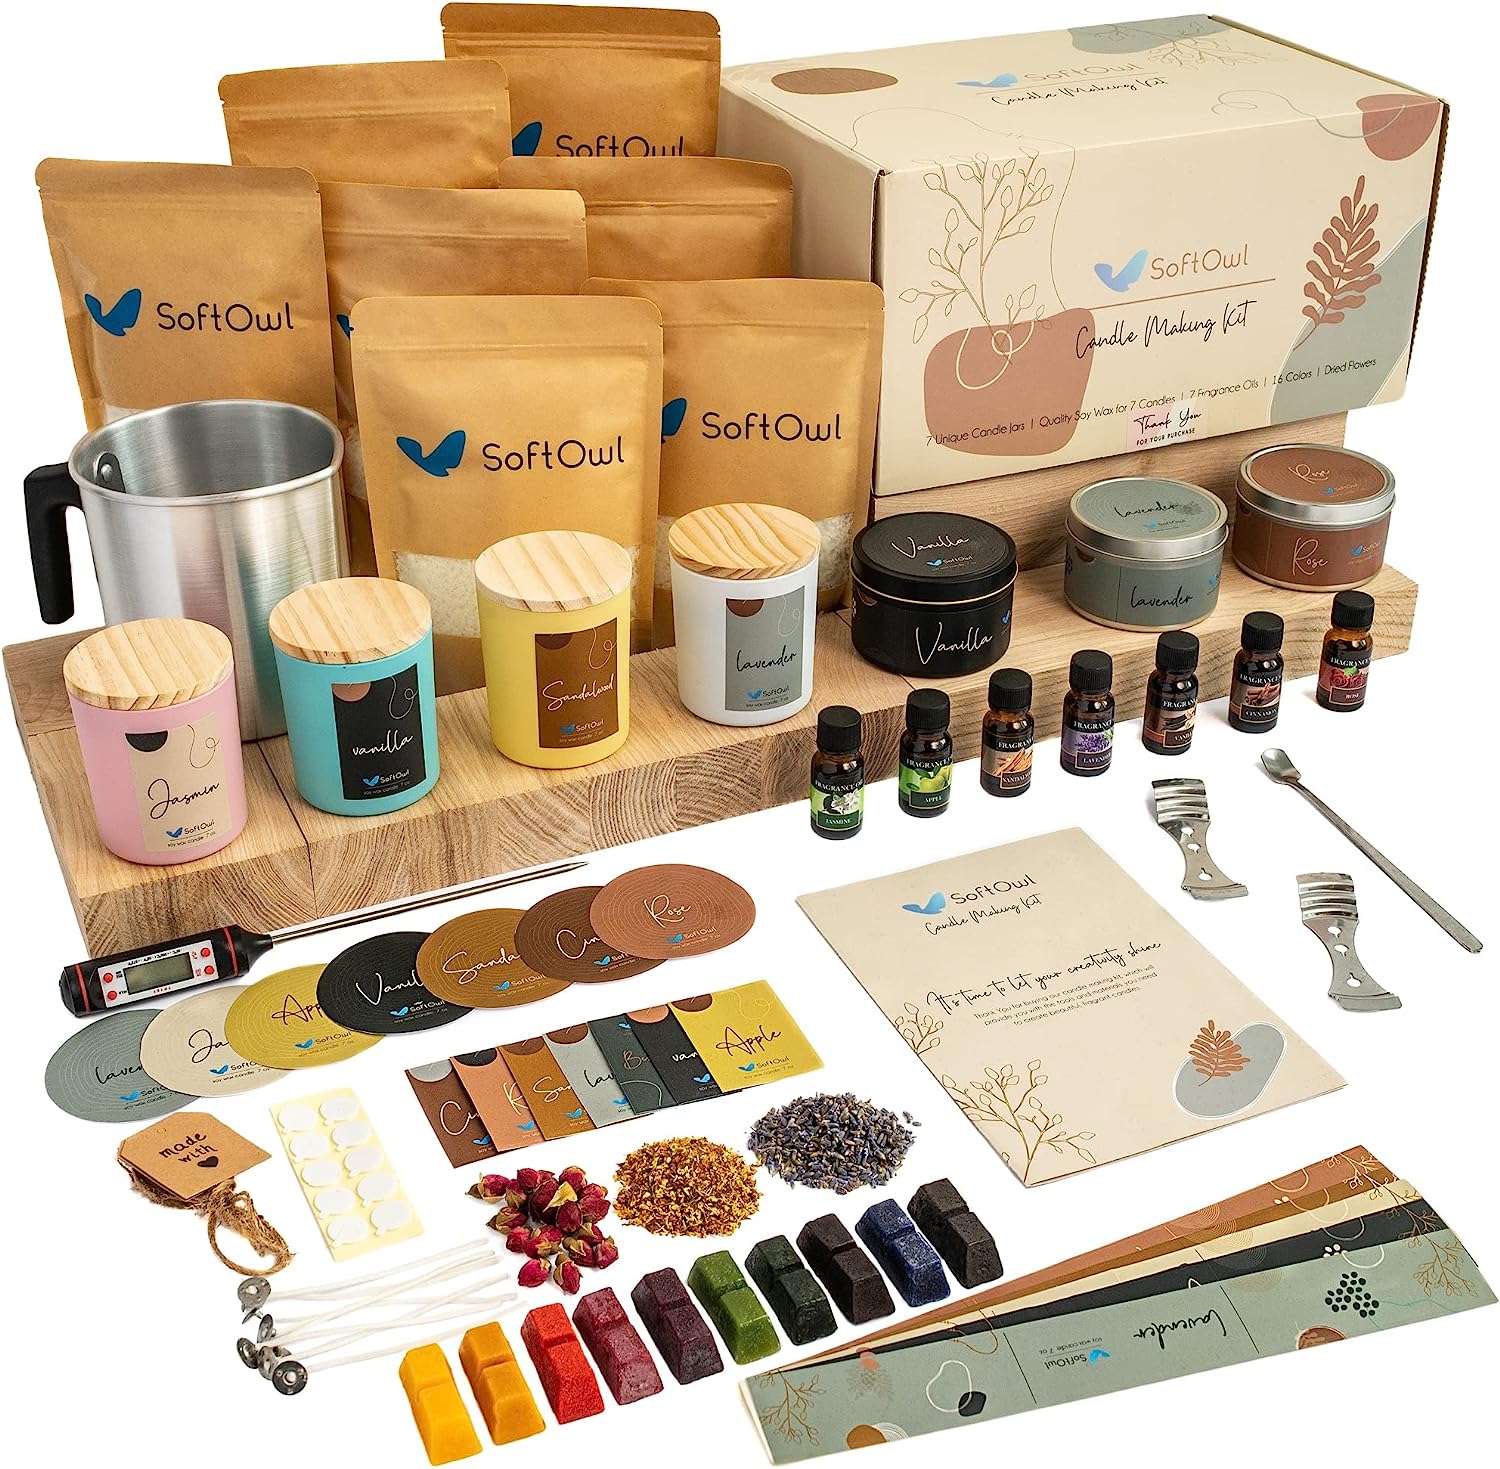 A soy candle making kit is a wonderful gift idea for craft lovers.